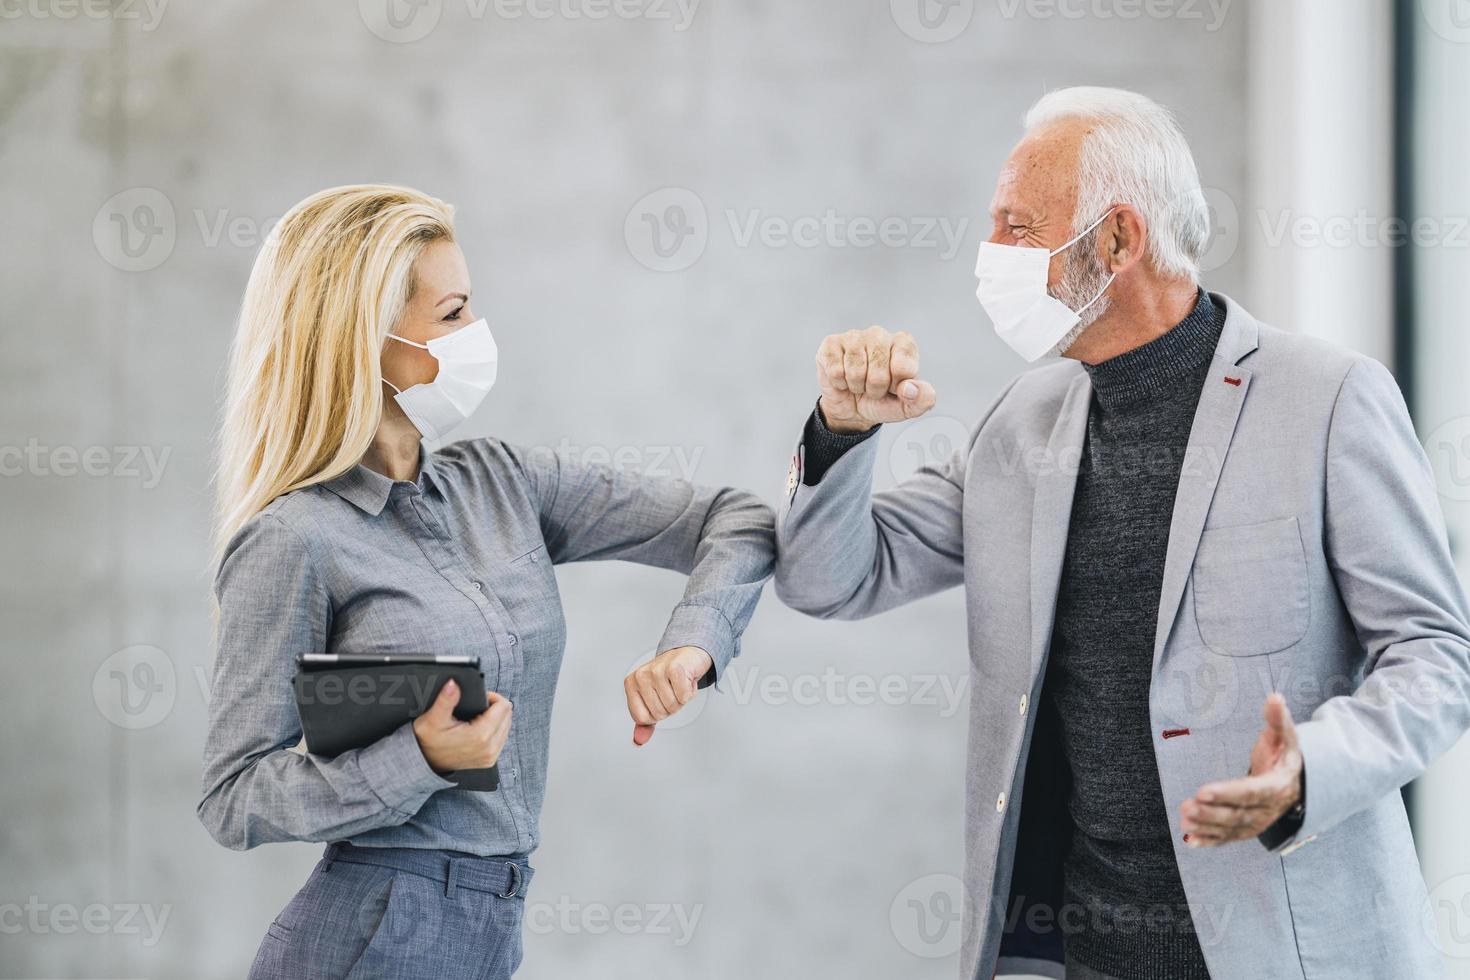 Two Business Person Greeting With Bumping Elbows During Coronavirus Pandemic In The Office photo